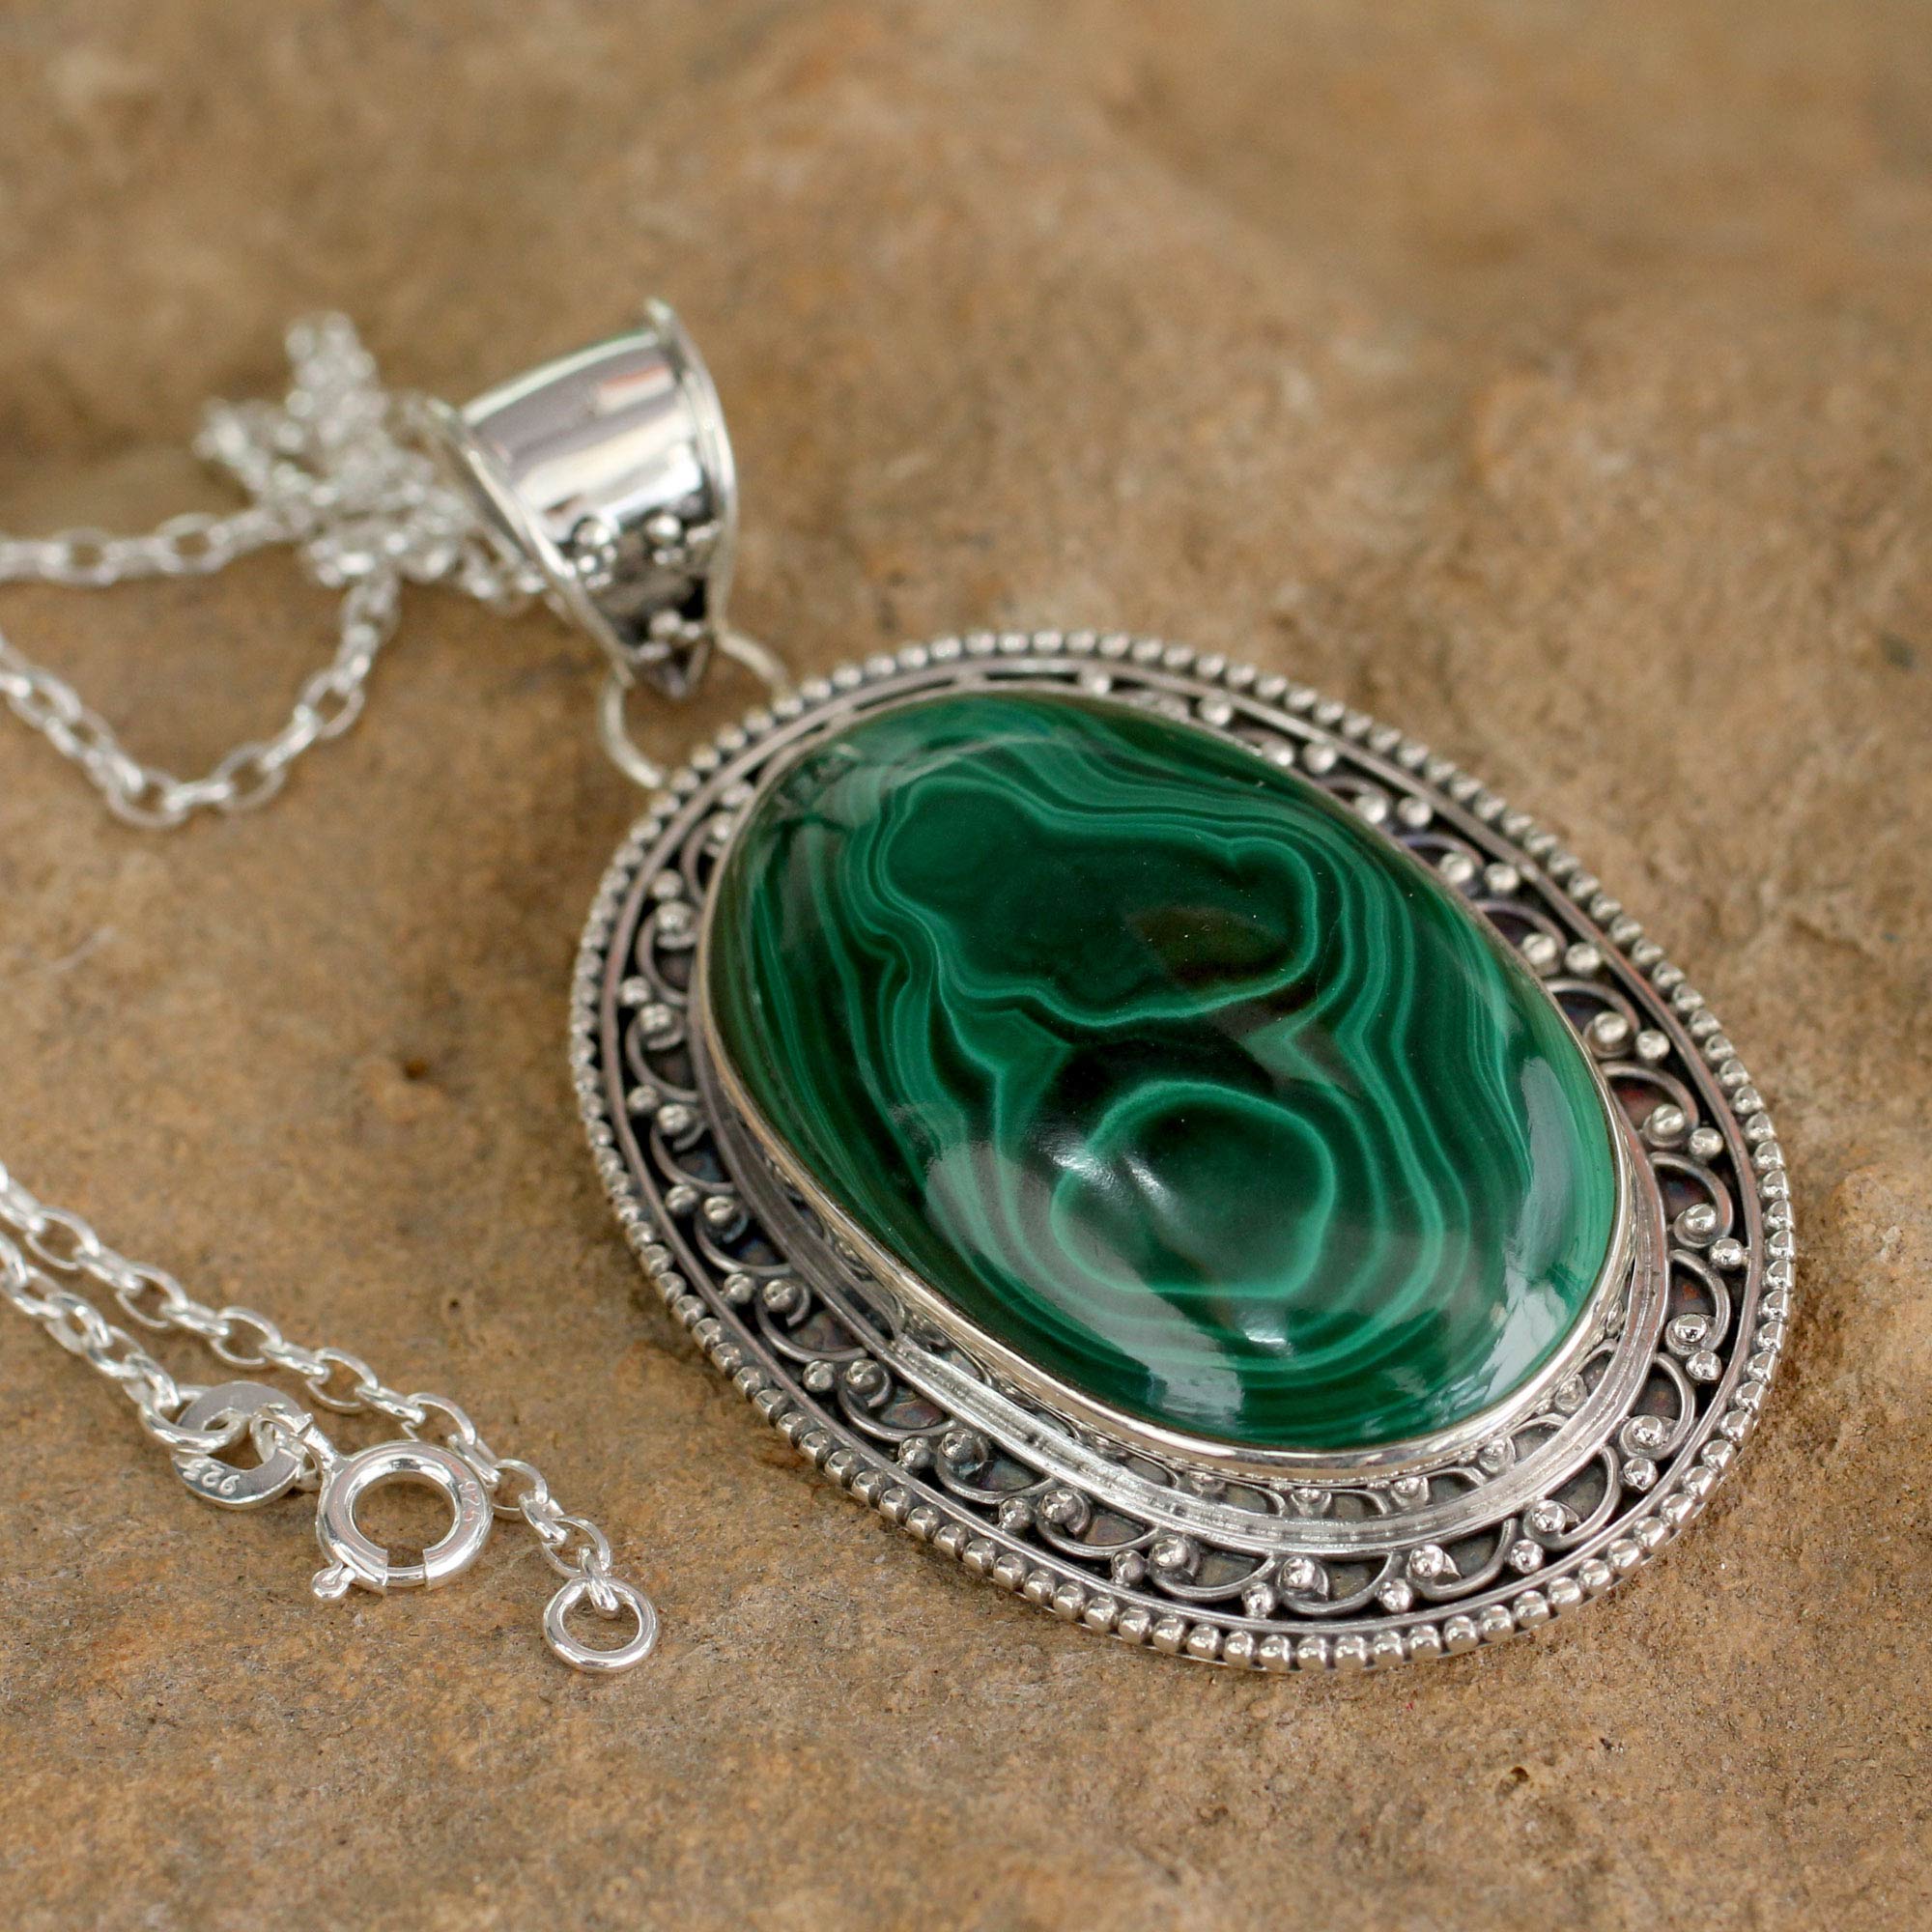 Fair Trade Sterling Silver and Malachite Pendant Necklace, 'Mirror Mirror on the Wall'